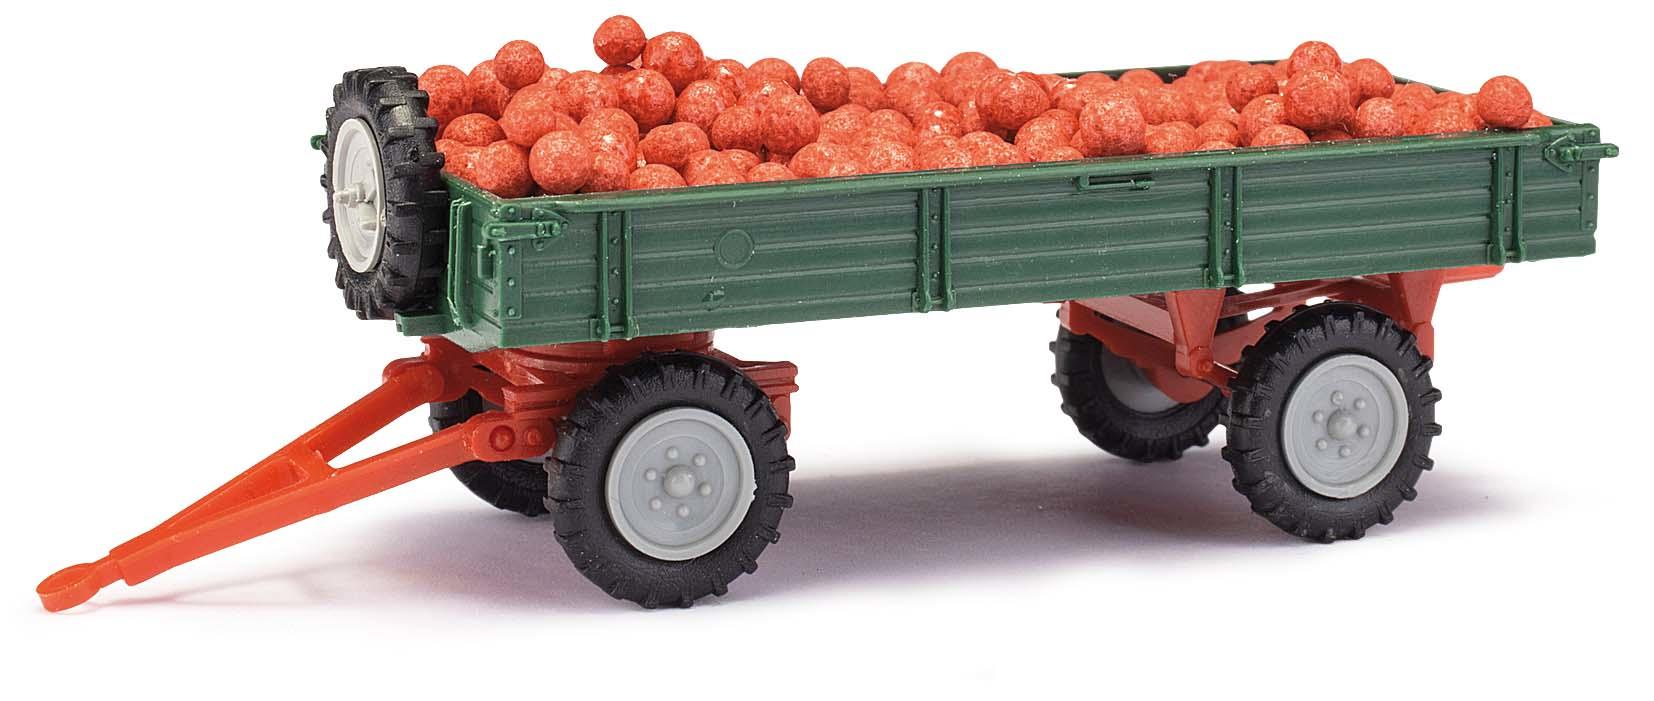 Busch 210010220 Green T4 trailer with apples